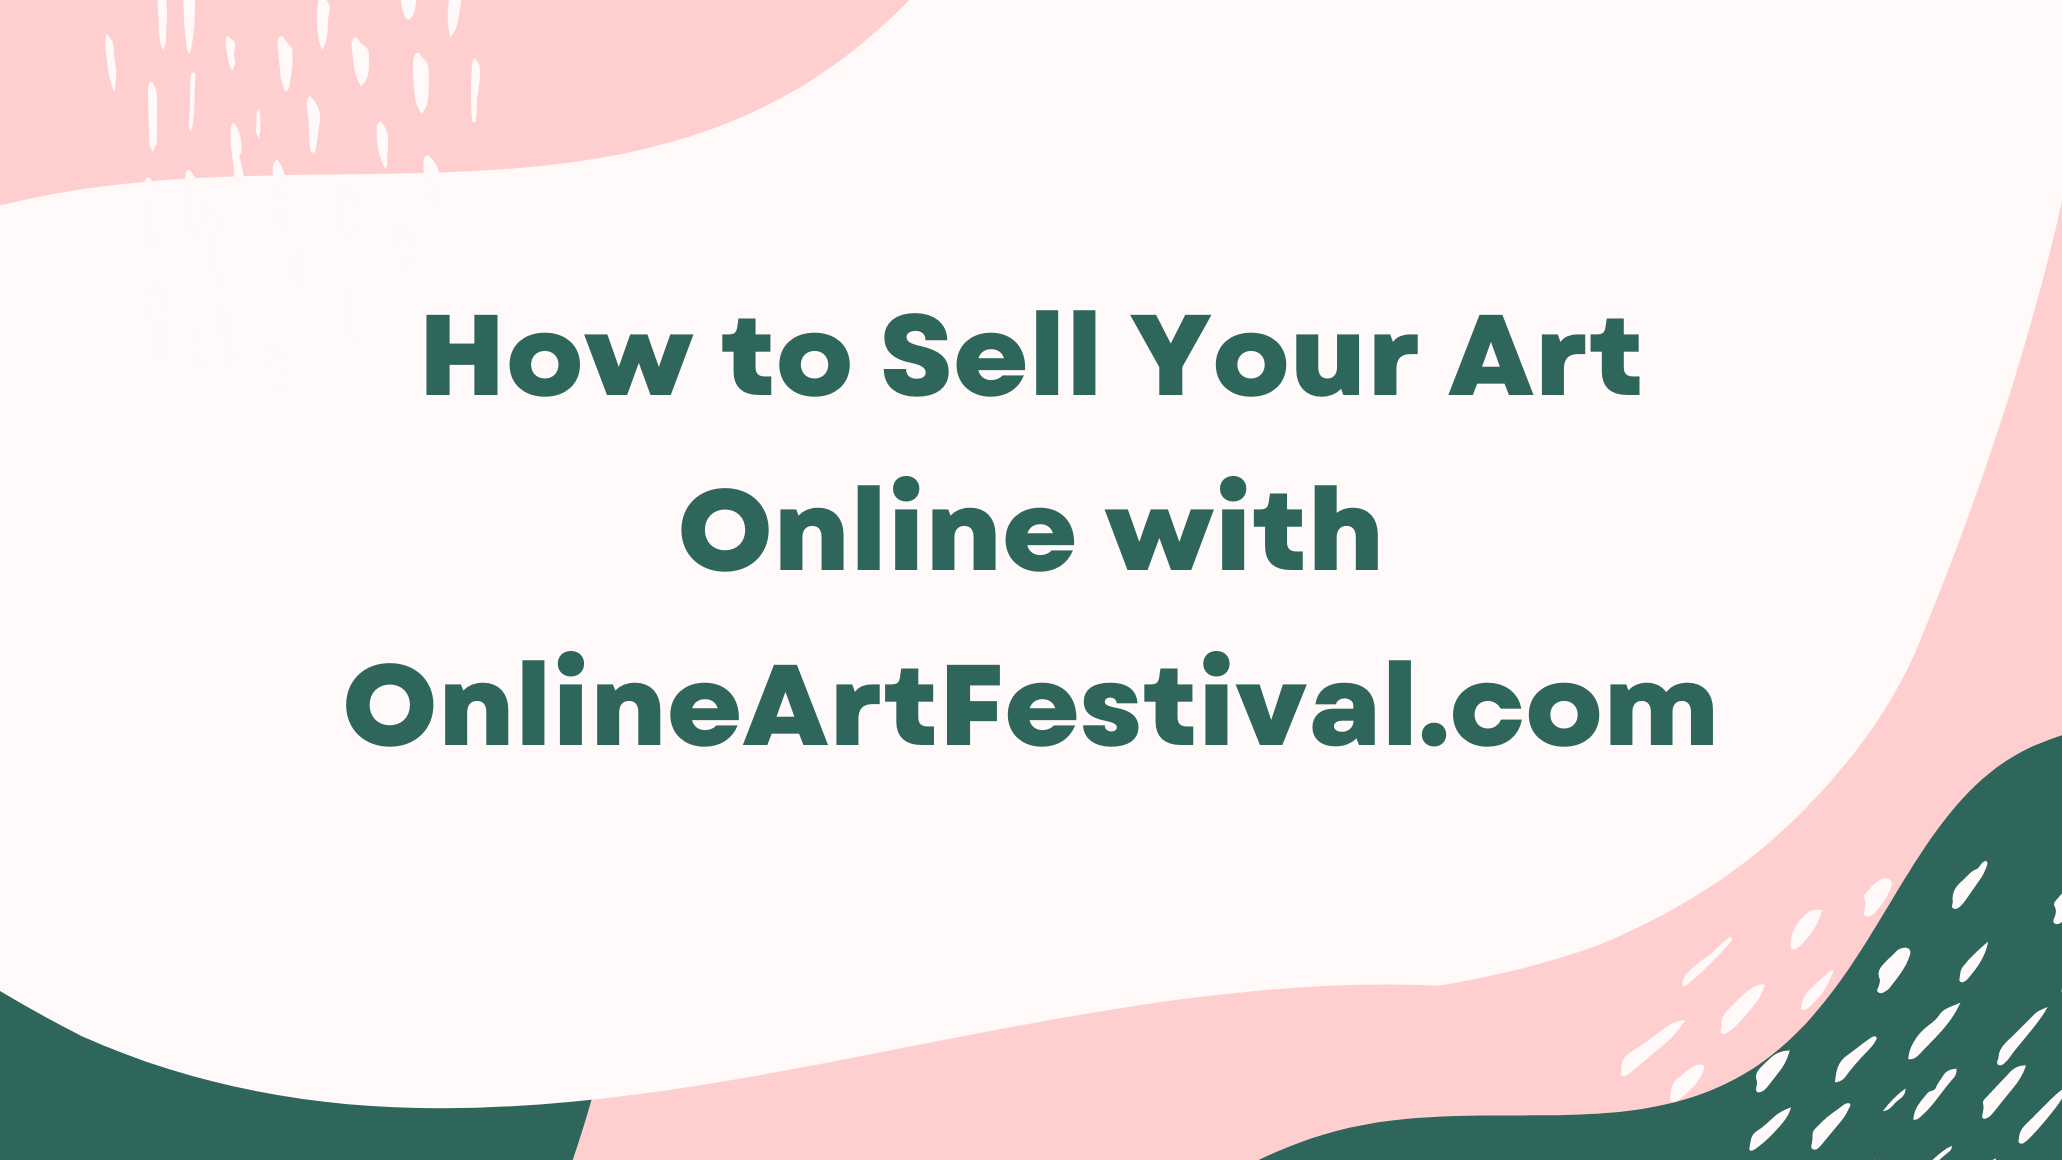 How to Sell Your Art Online with OnlineArtFestival.com